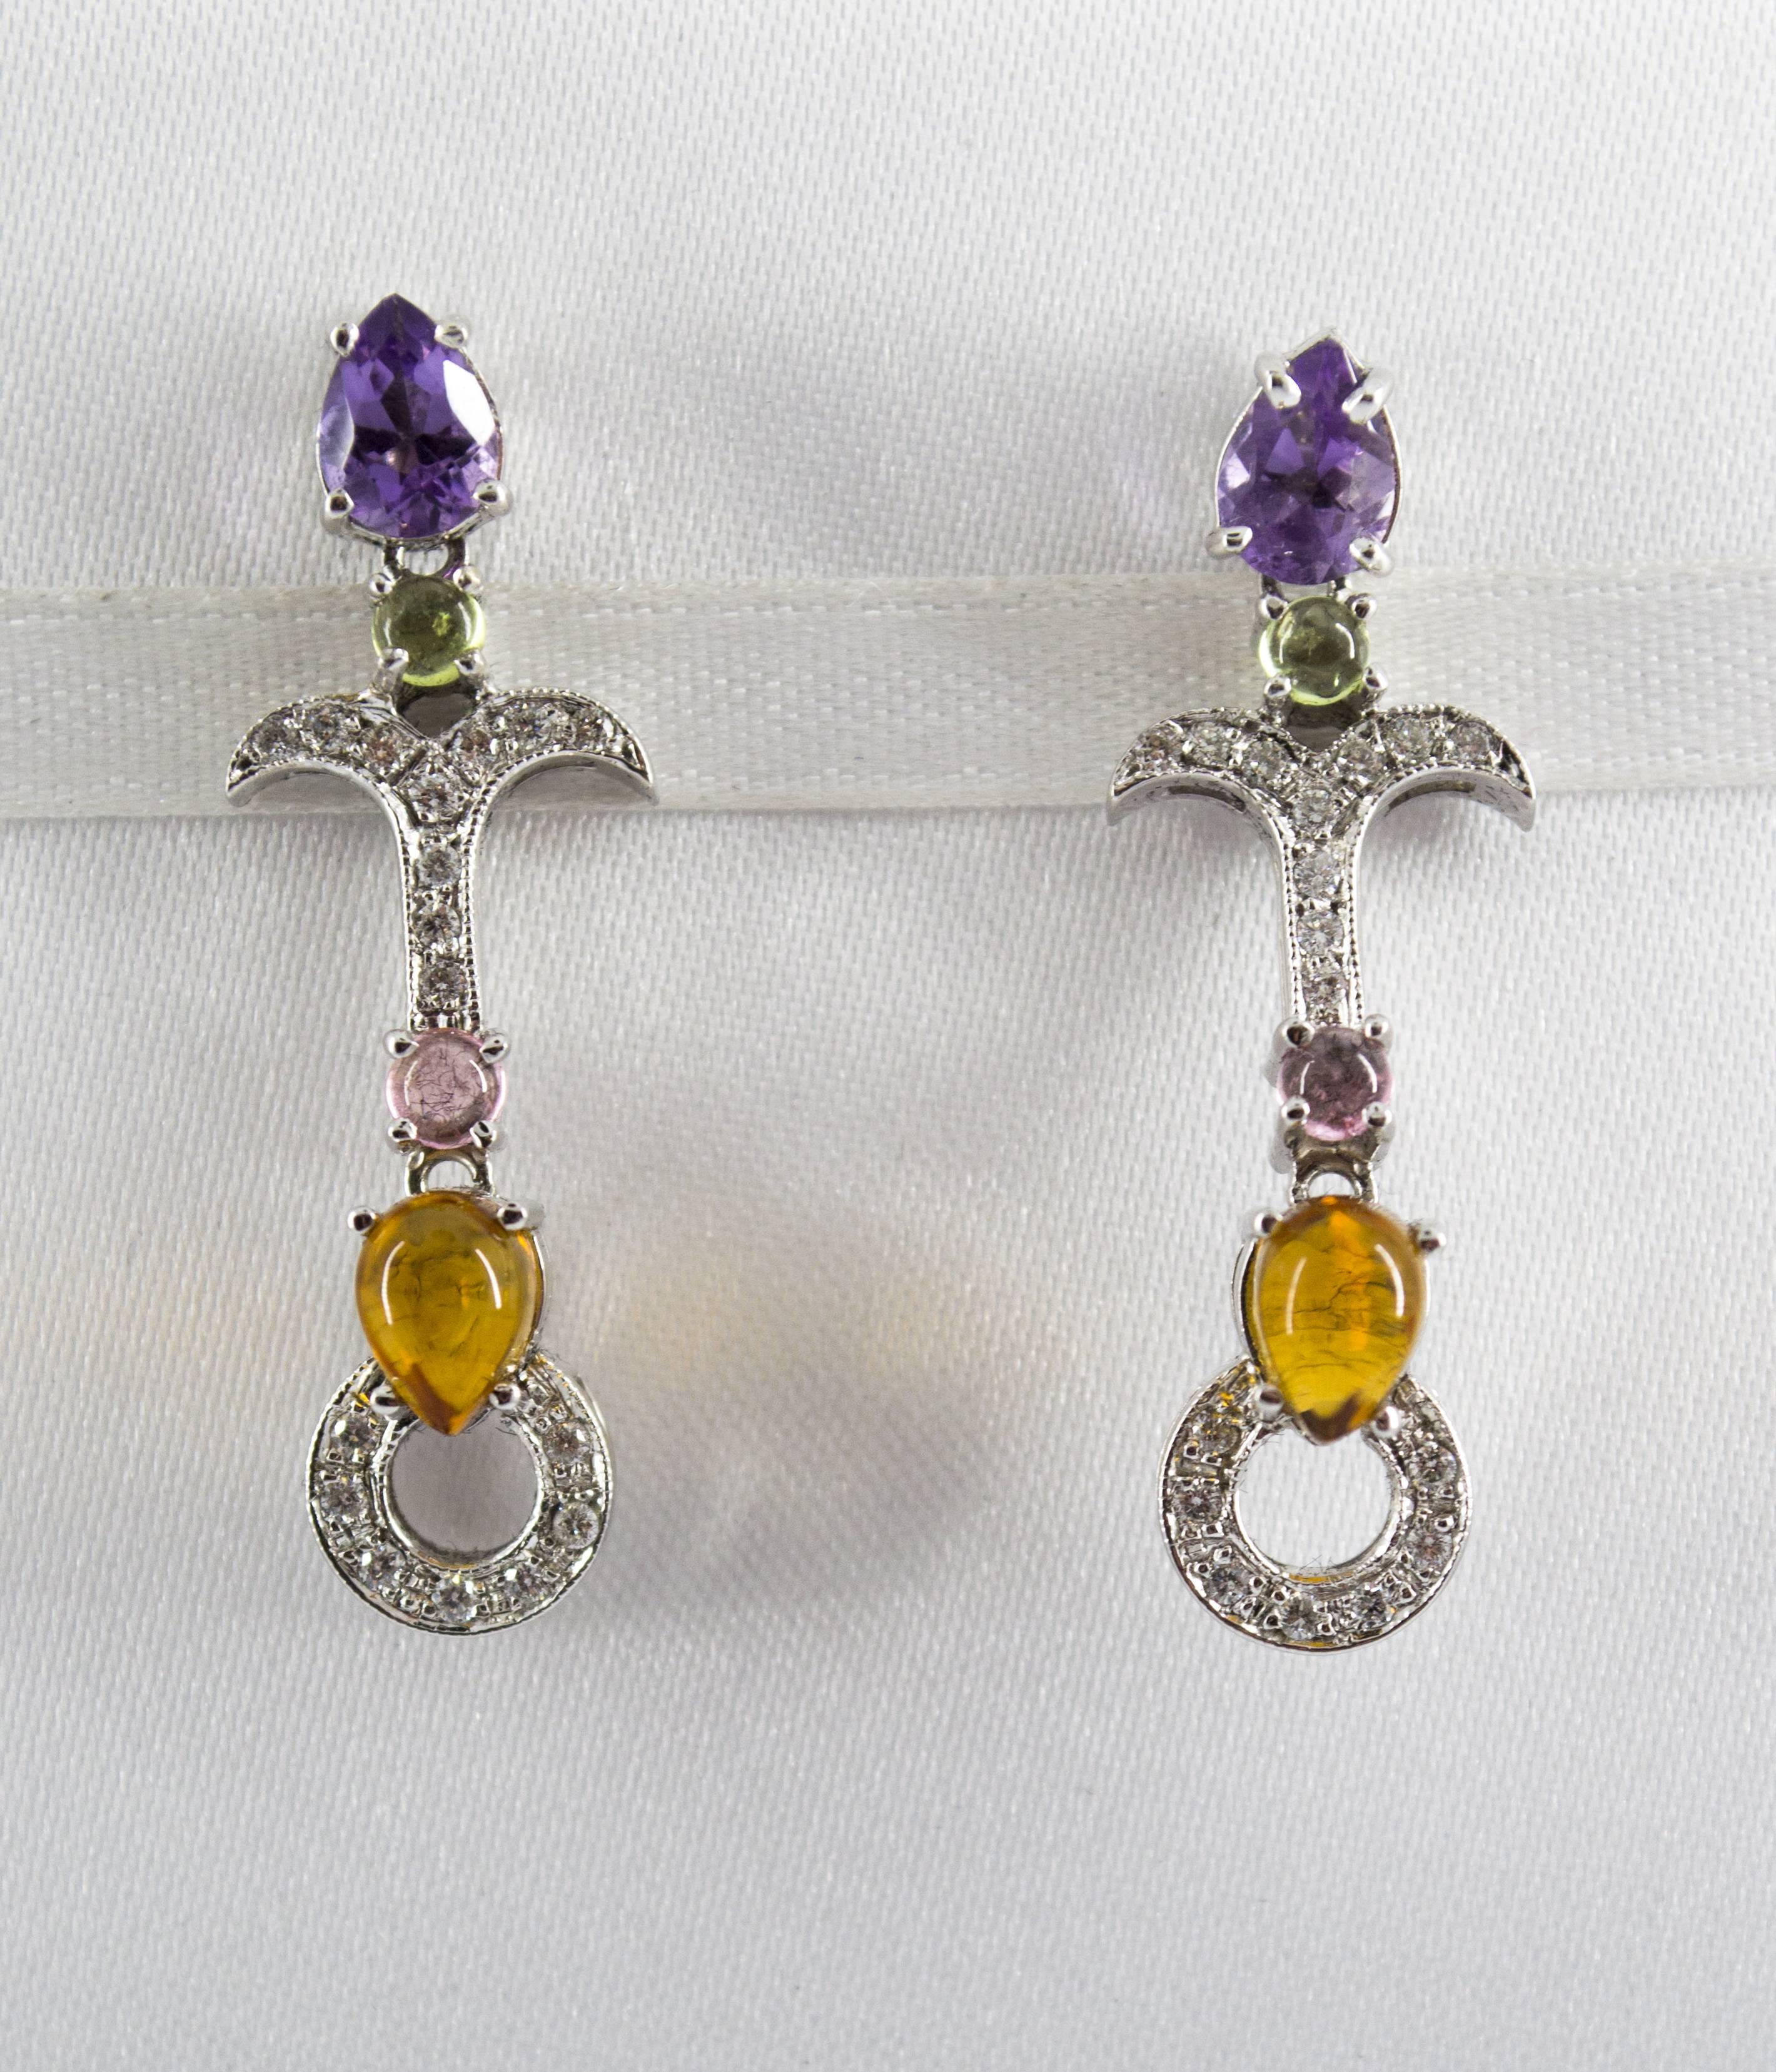 These Earrings are made of 9K White Gold.
These Earrings have 0.30 Carats of White Diamonds.
These Earrings have also Amethyst and Citrine.
All our Earrings have pins for pierced ears but we can change the closure and make any of our Earrings